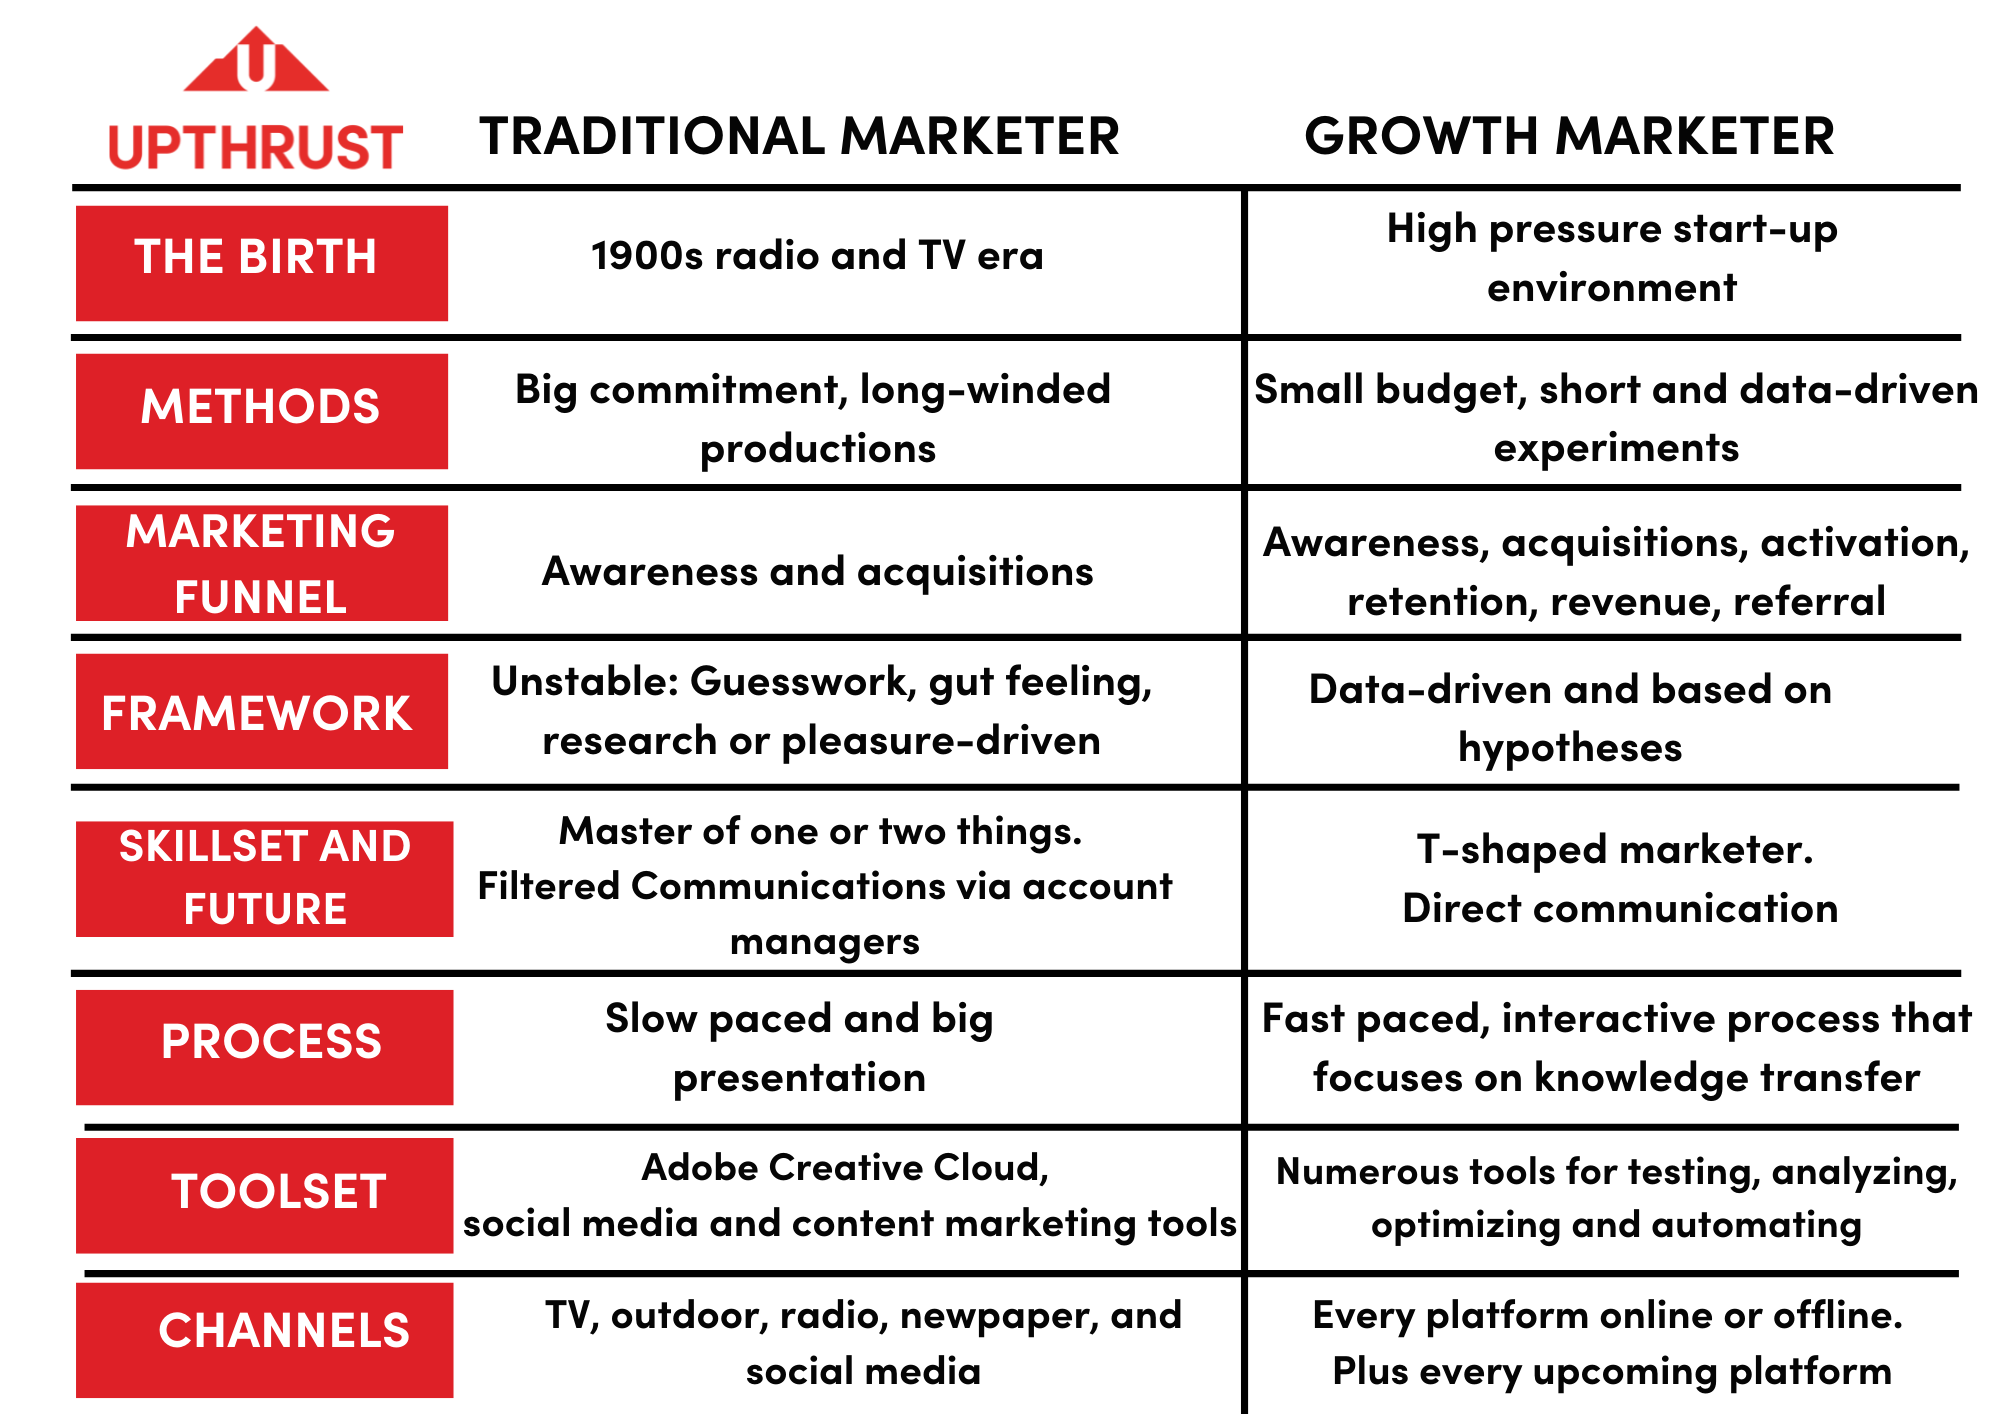 Juxtaposition of traditional marketer characteristics vs growth marketer characteristics 